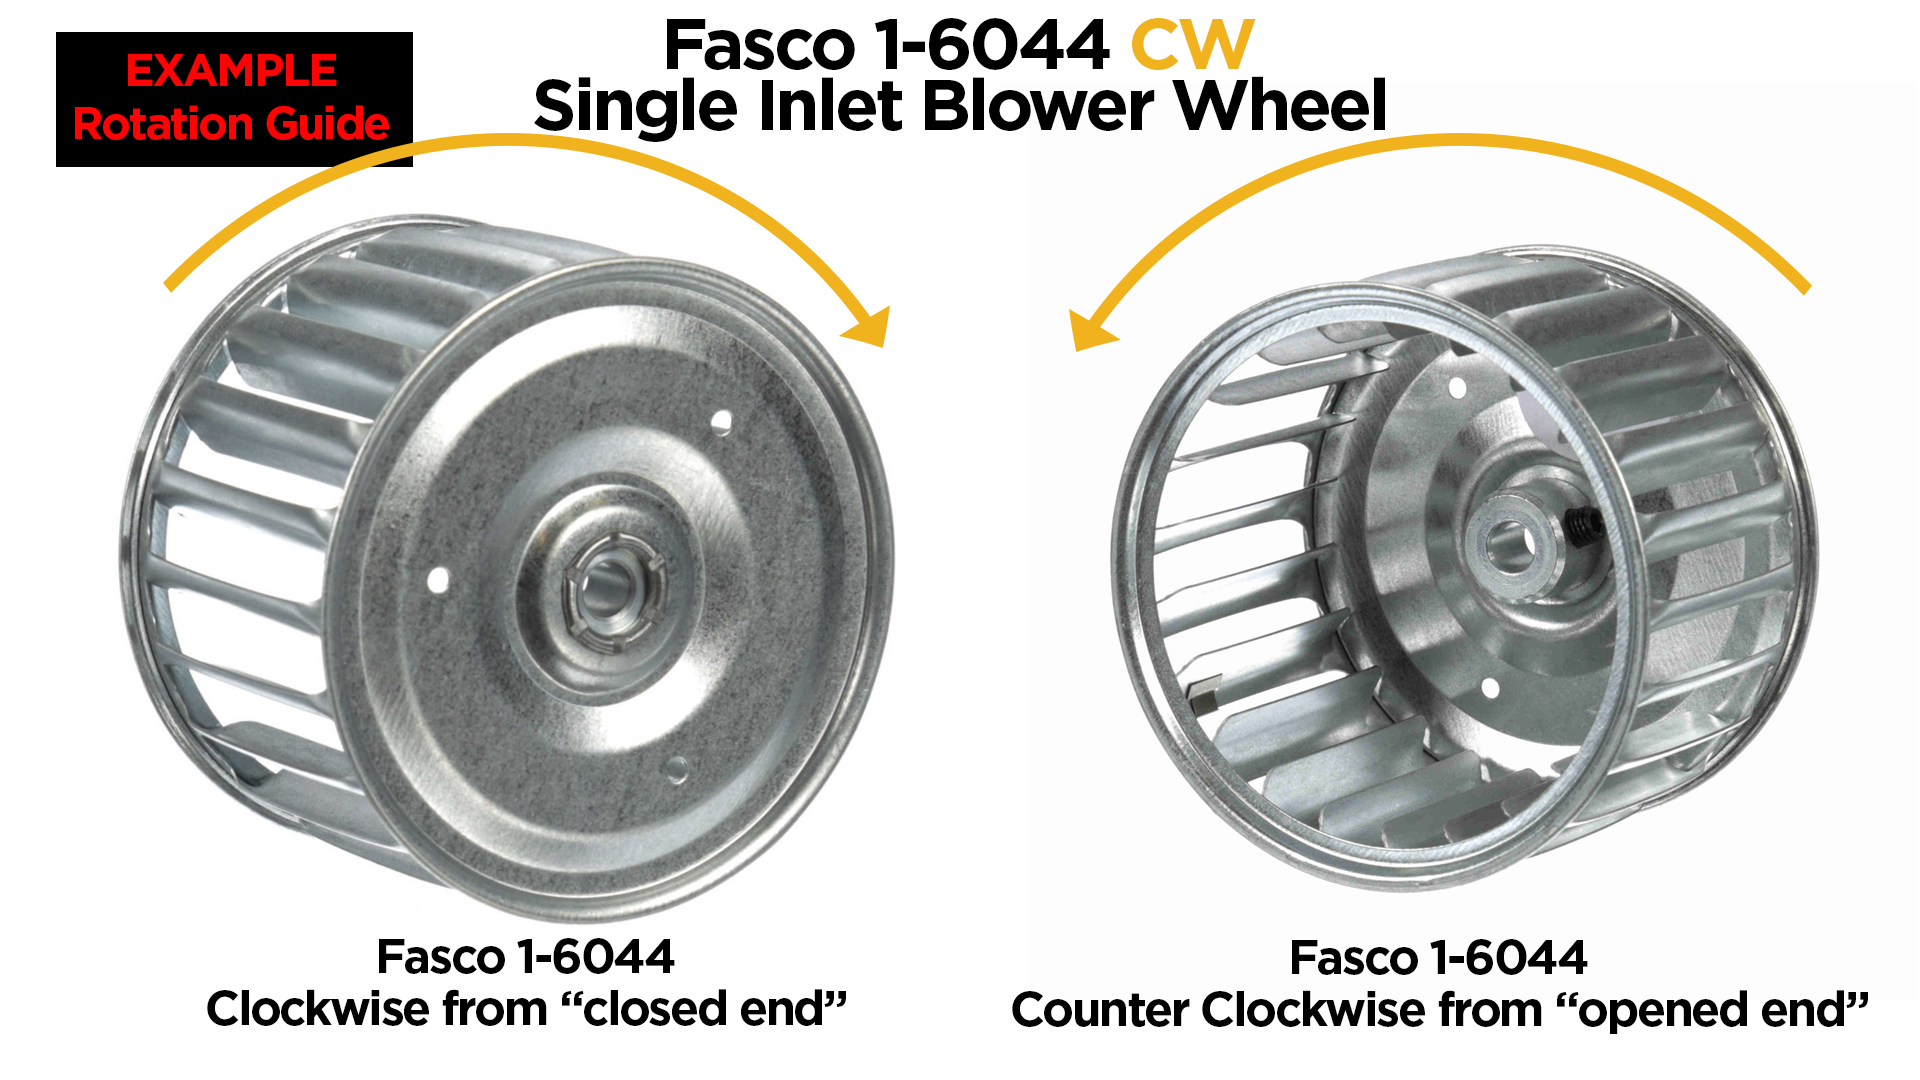 clockwise rotation guideline for single inlet blower wheel